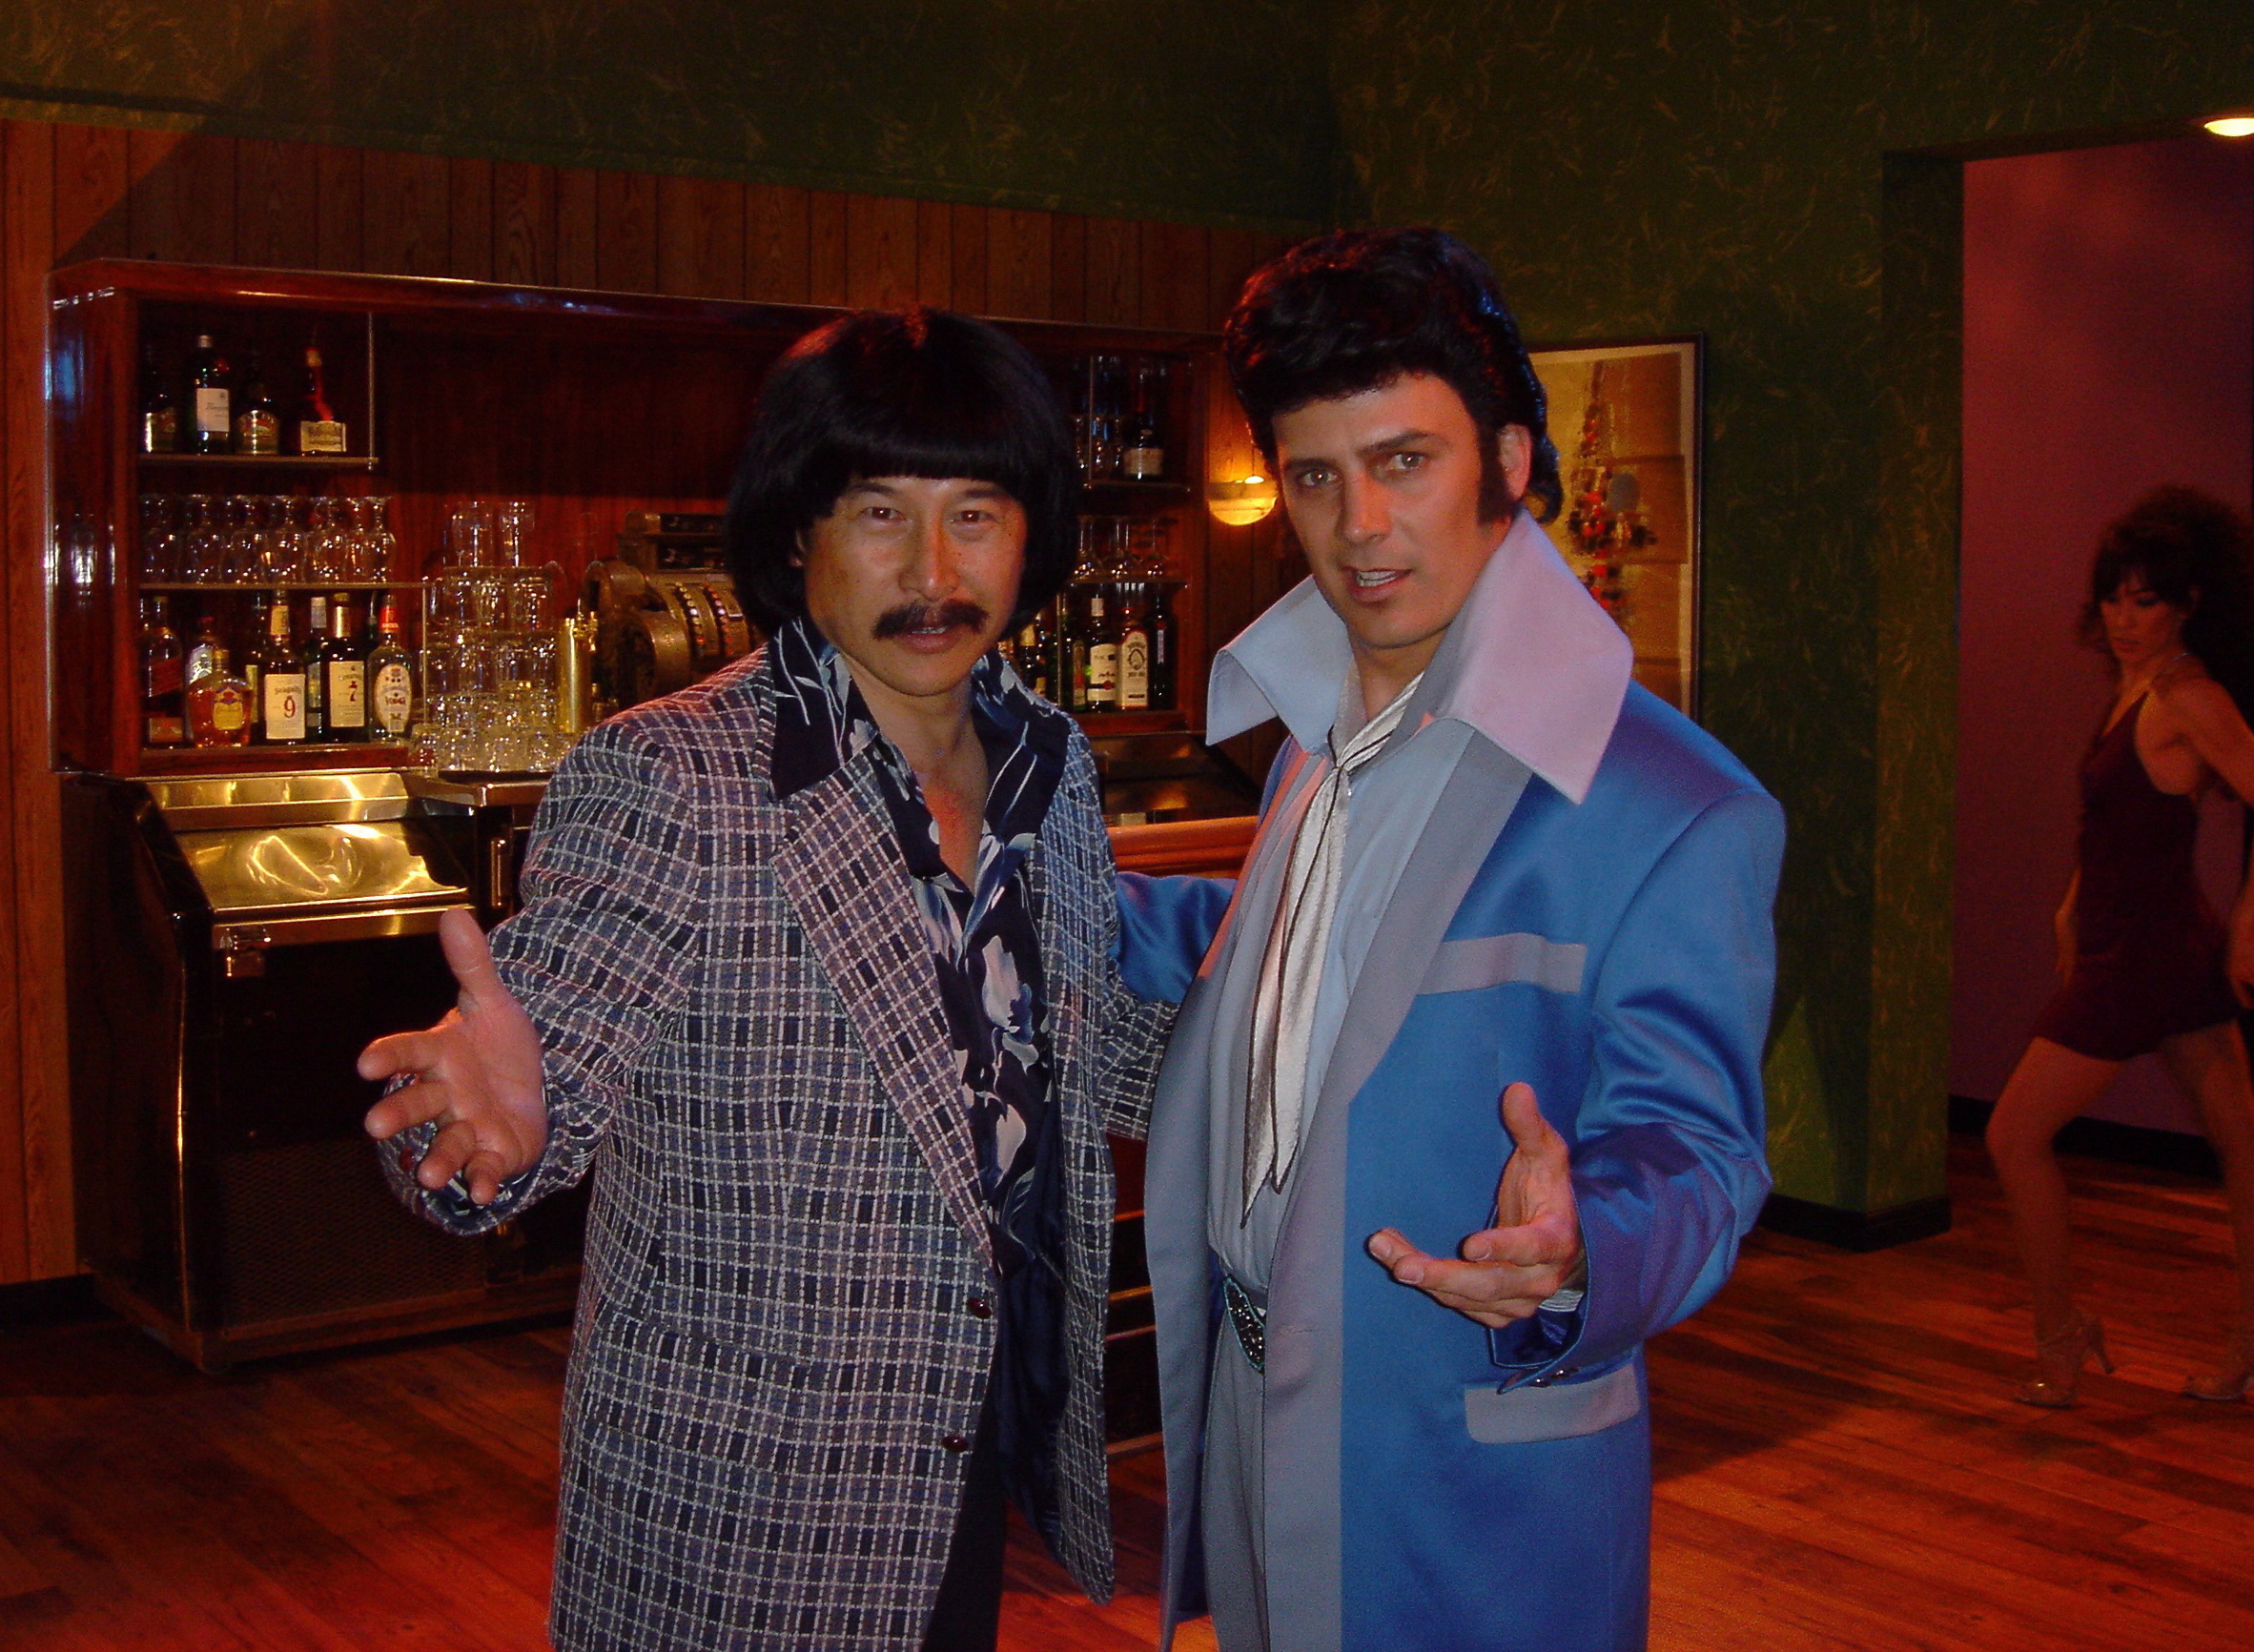 James and Elvis?